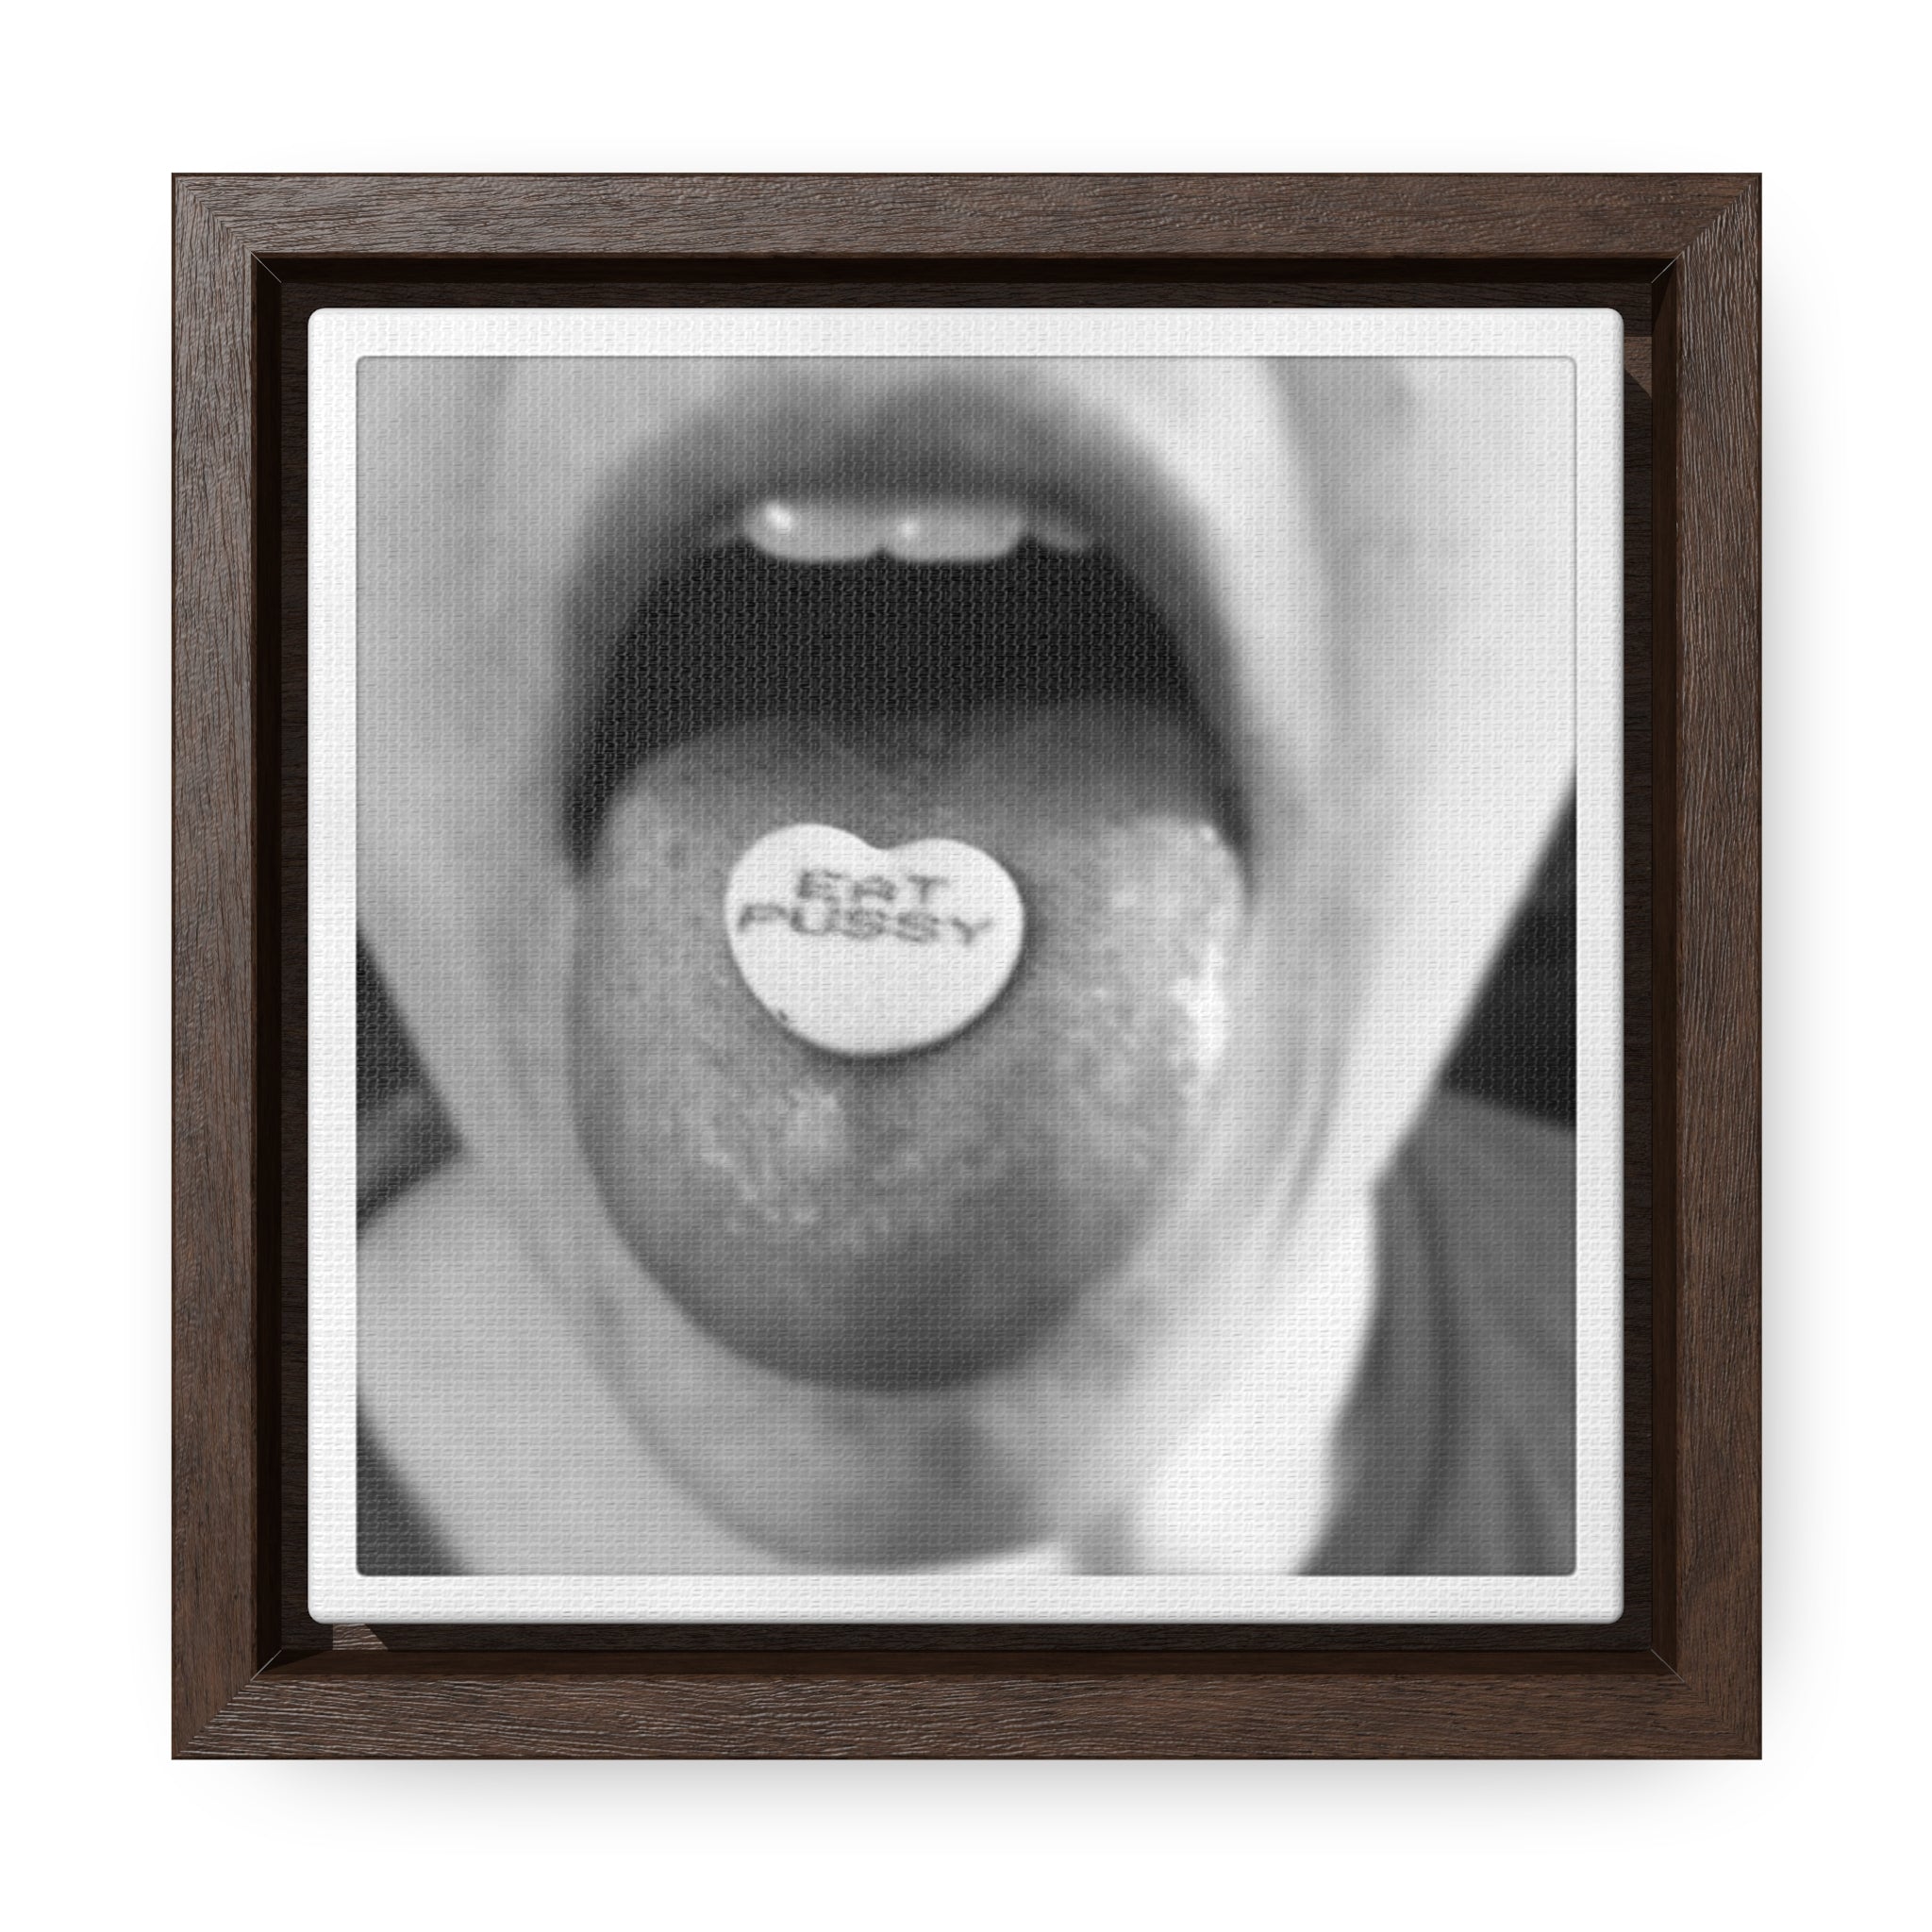 Eat Pussy - Gallery Canvas Wraps, Square Frame